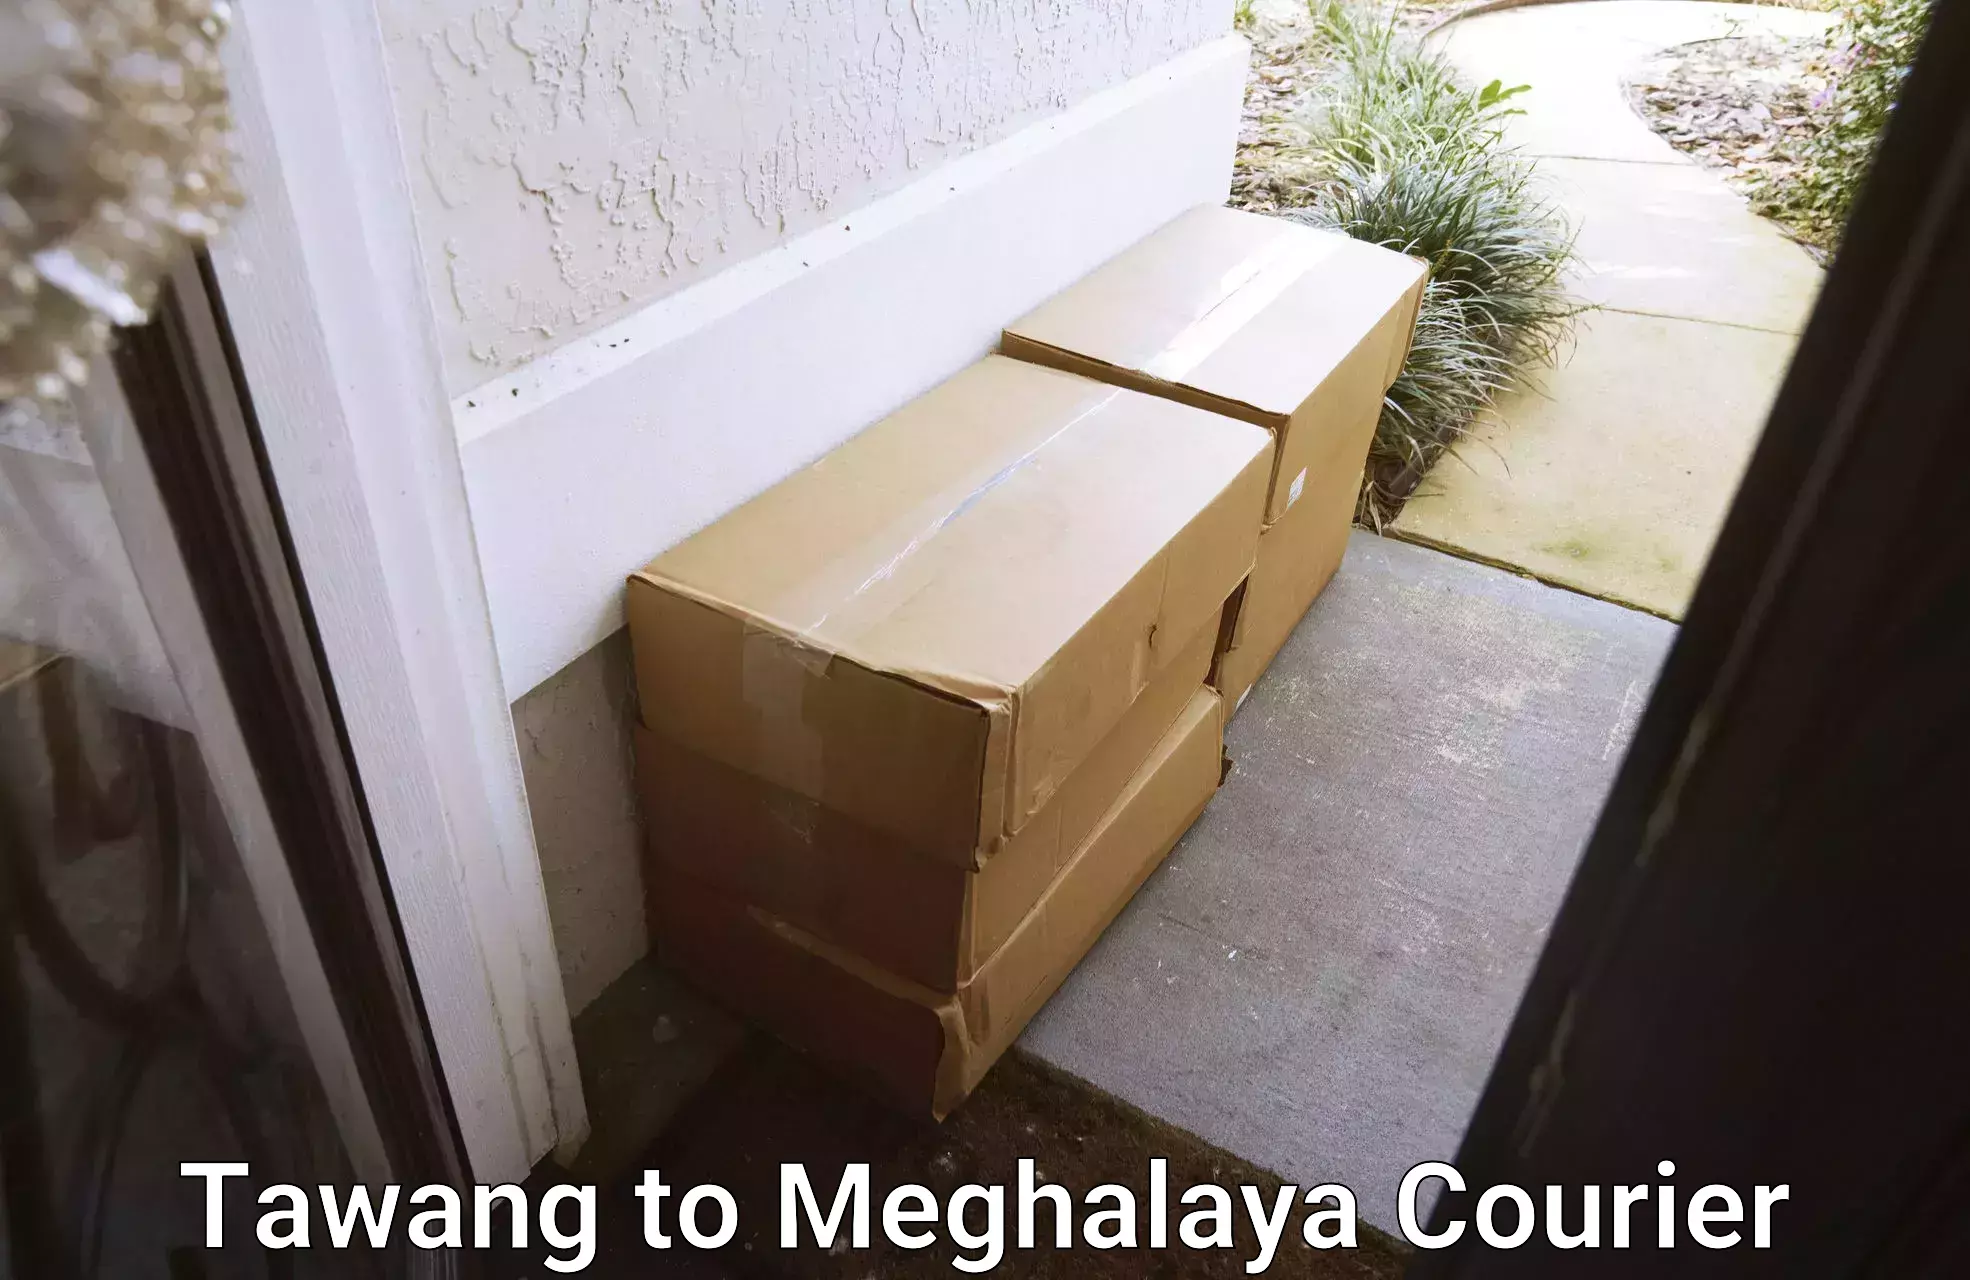 Courier service comparison Tawang to Williamnagar